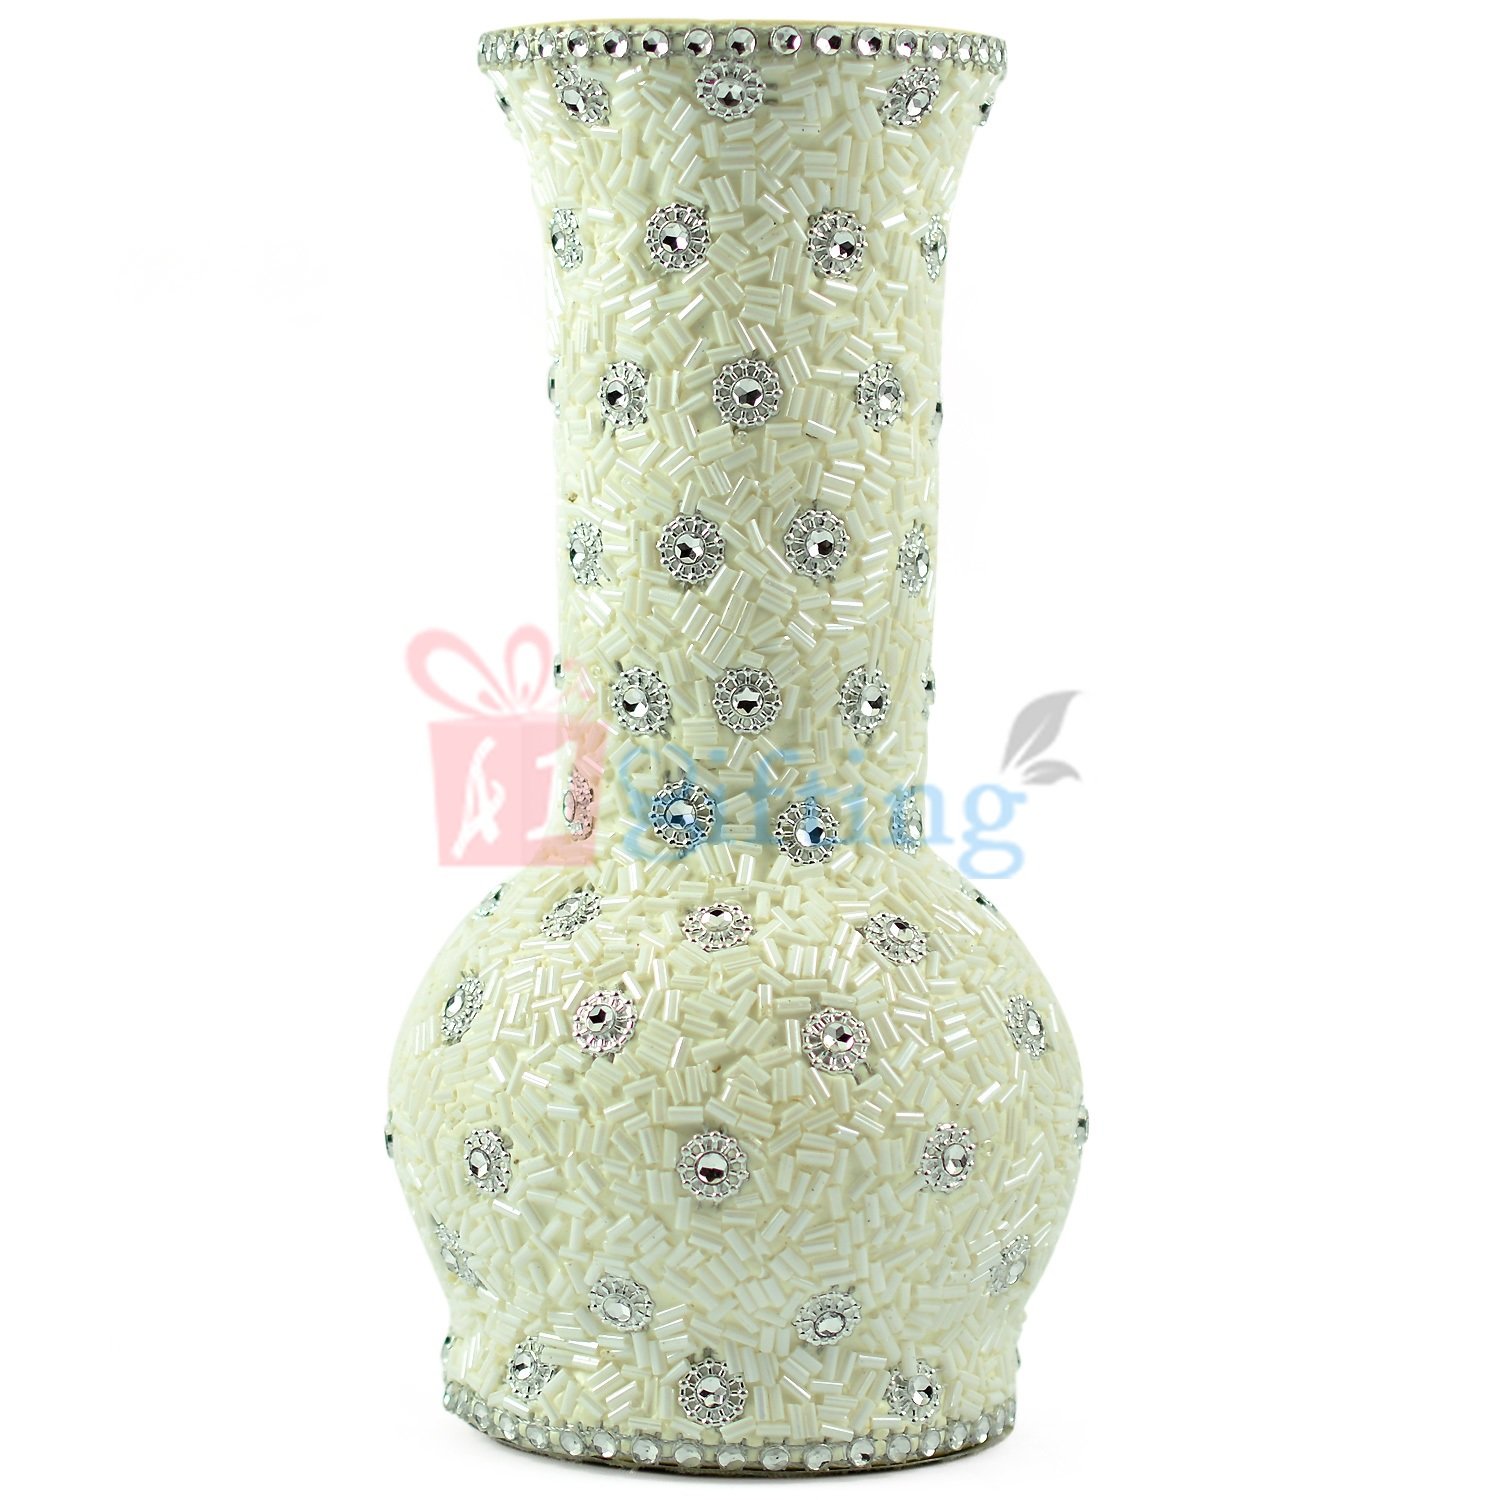 Beautifully Crafted Diamond Studded Flower Pot in White